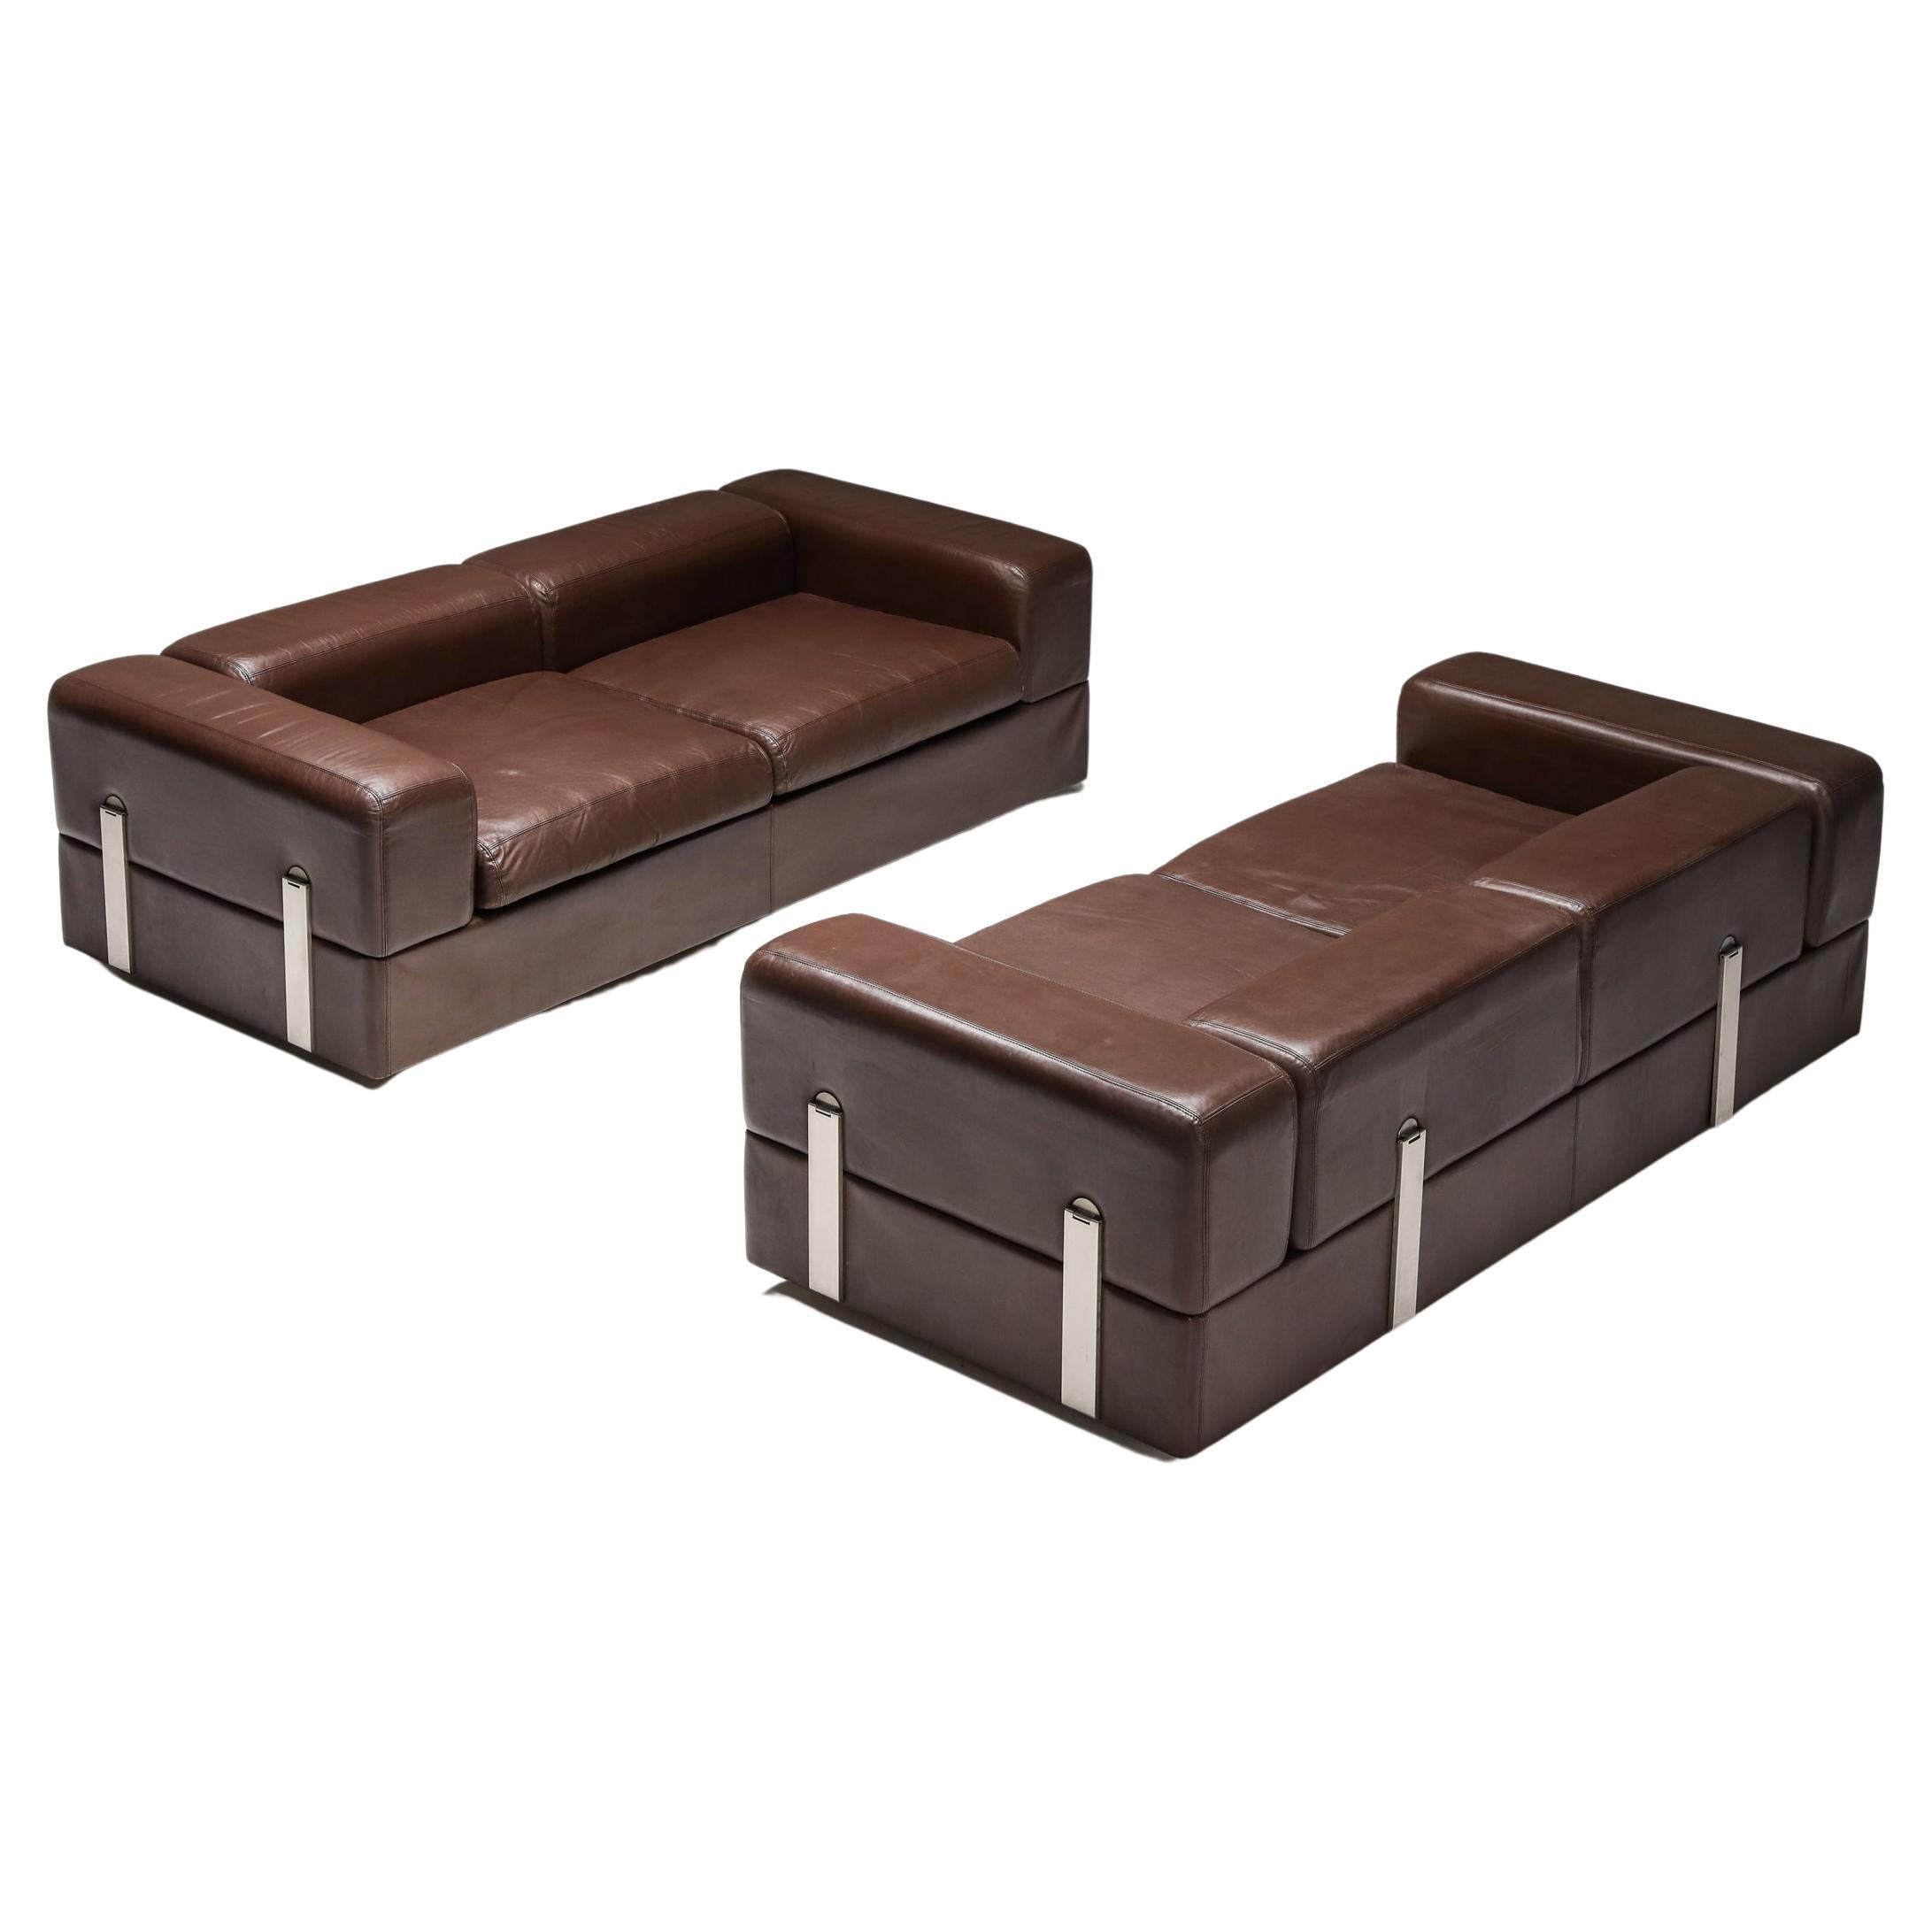 Post-Modern Daybed Sofa 711 by Tito Agnoli for Cinova in Brown Leather, 1960 For Sale